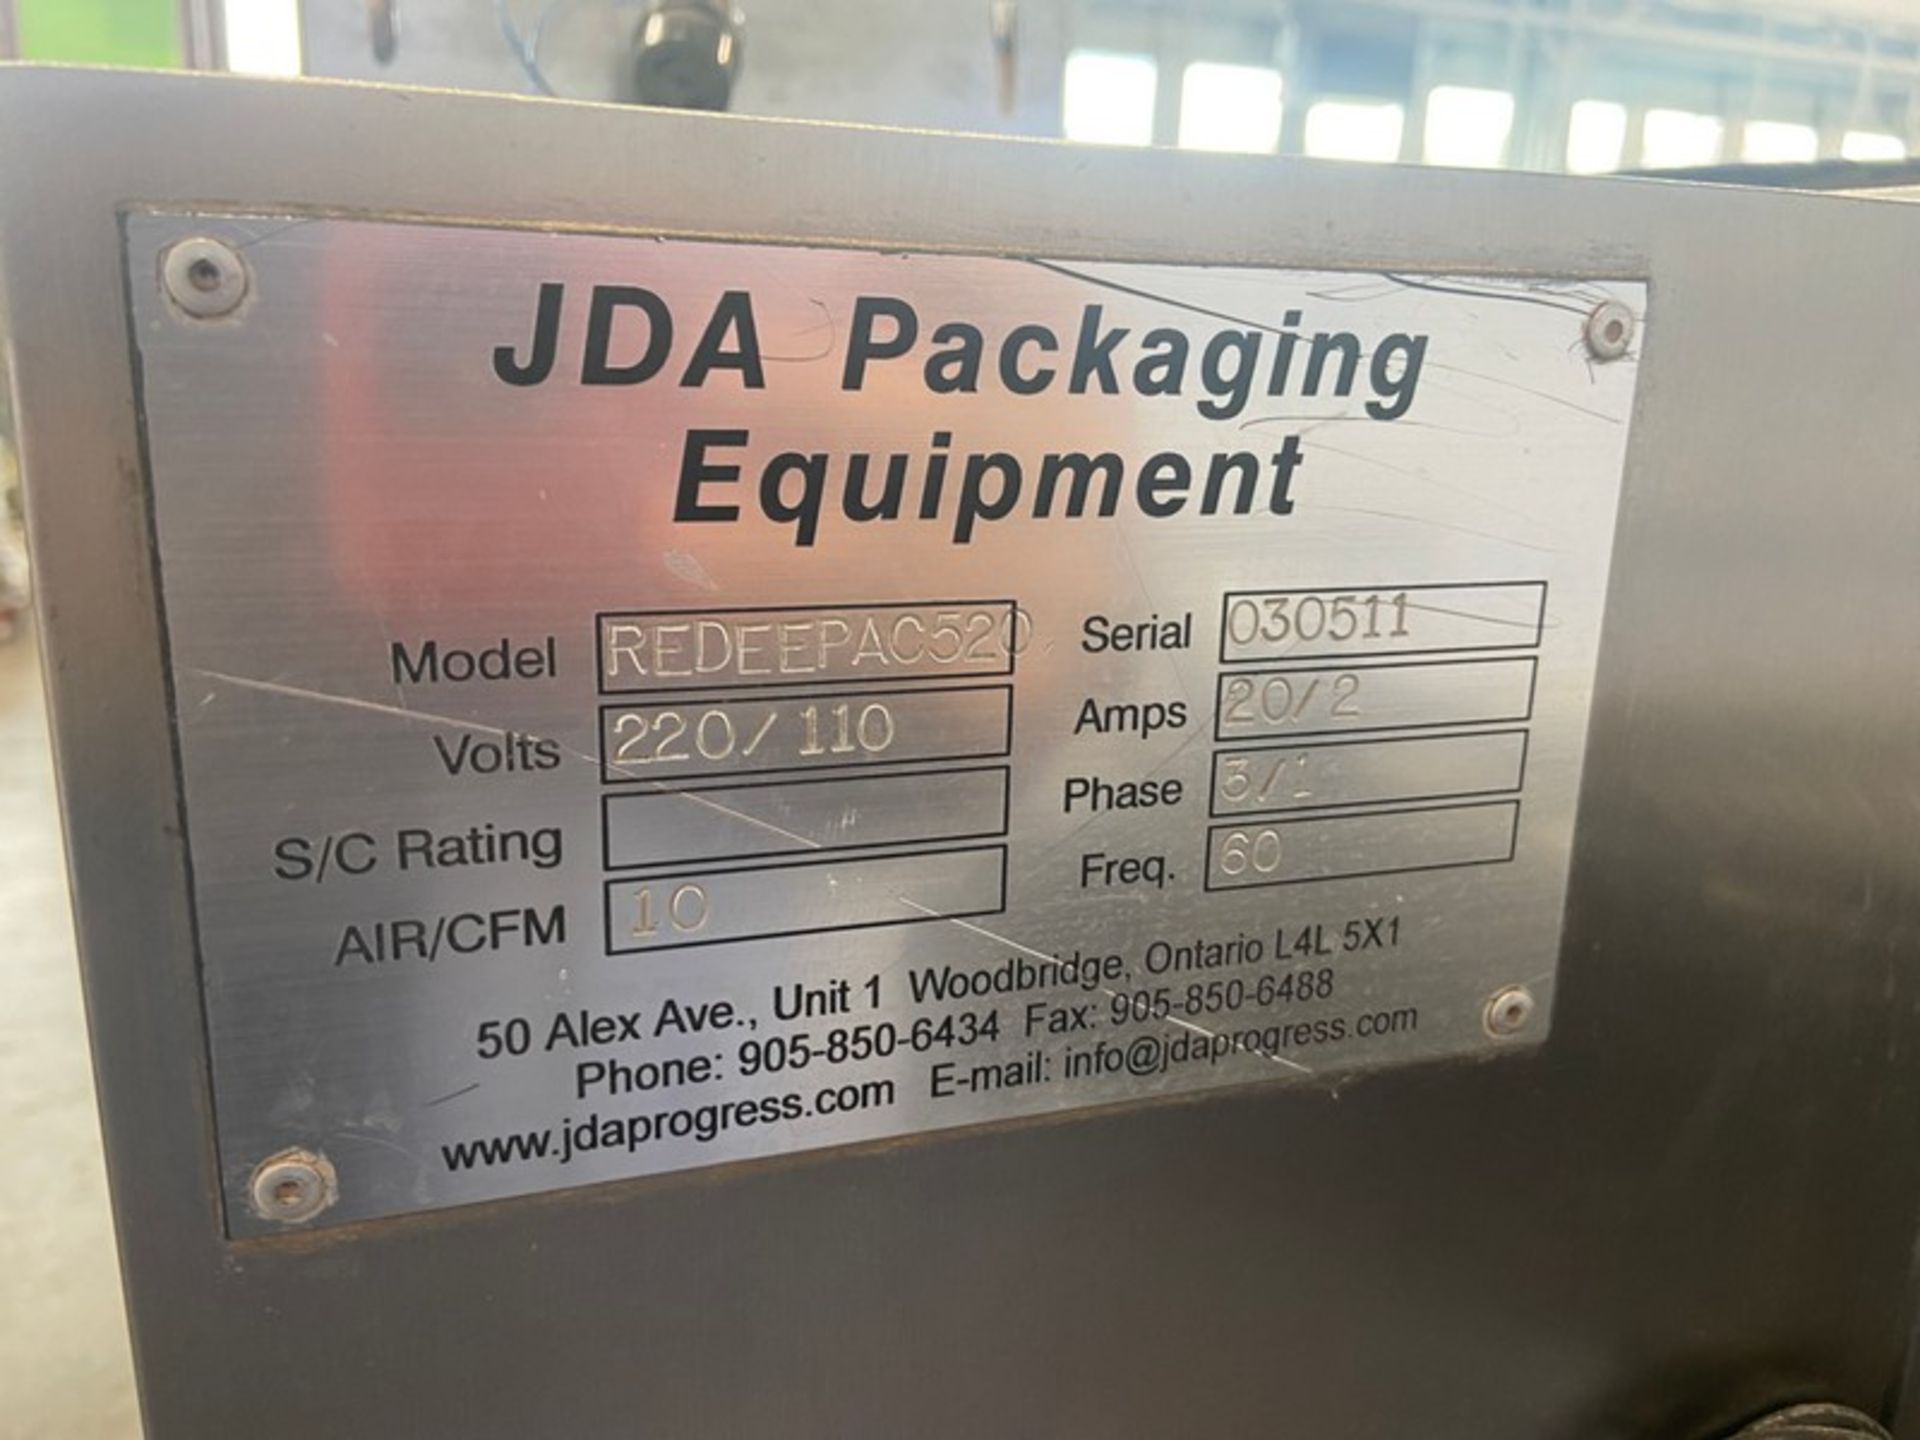 JDA Packaging Equipment VFFS & Scale System, M/N REDEEPAC520, S/N 030511, 220/110 Volts, with - Image 16 of 28